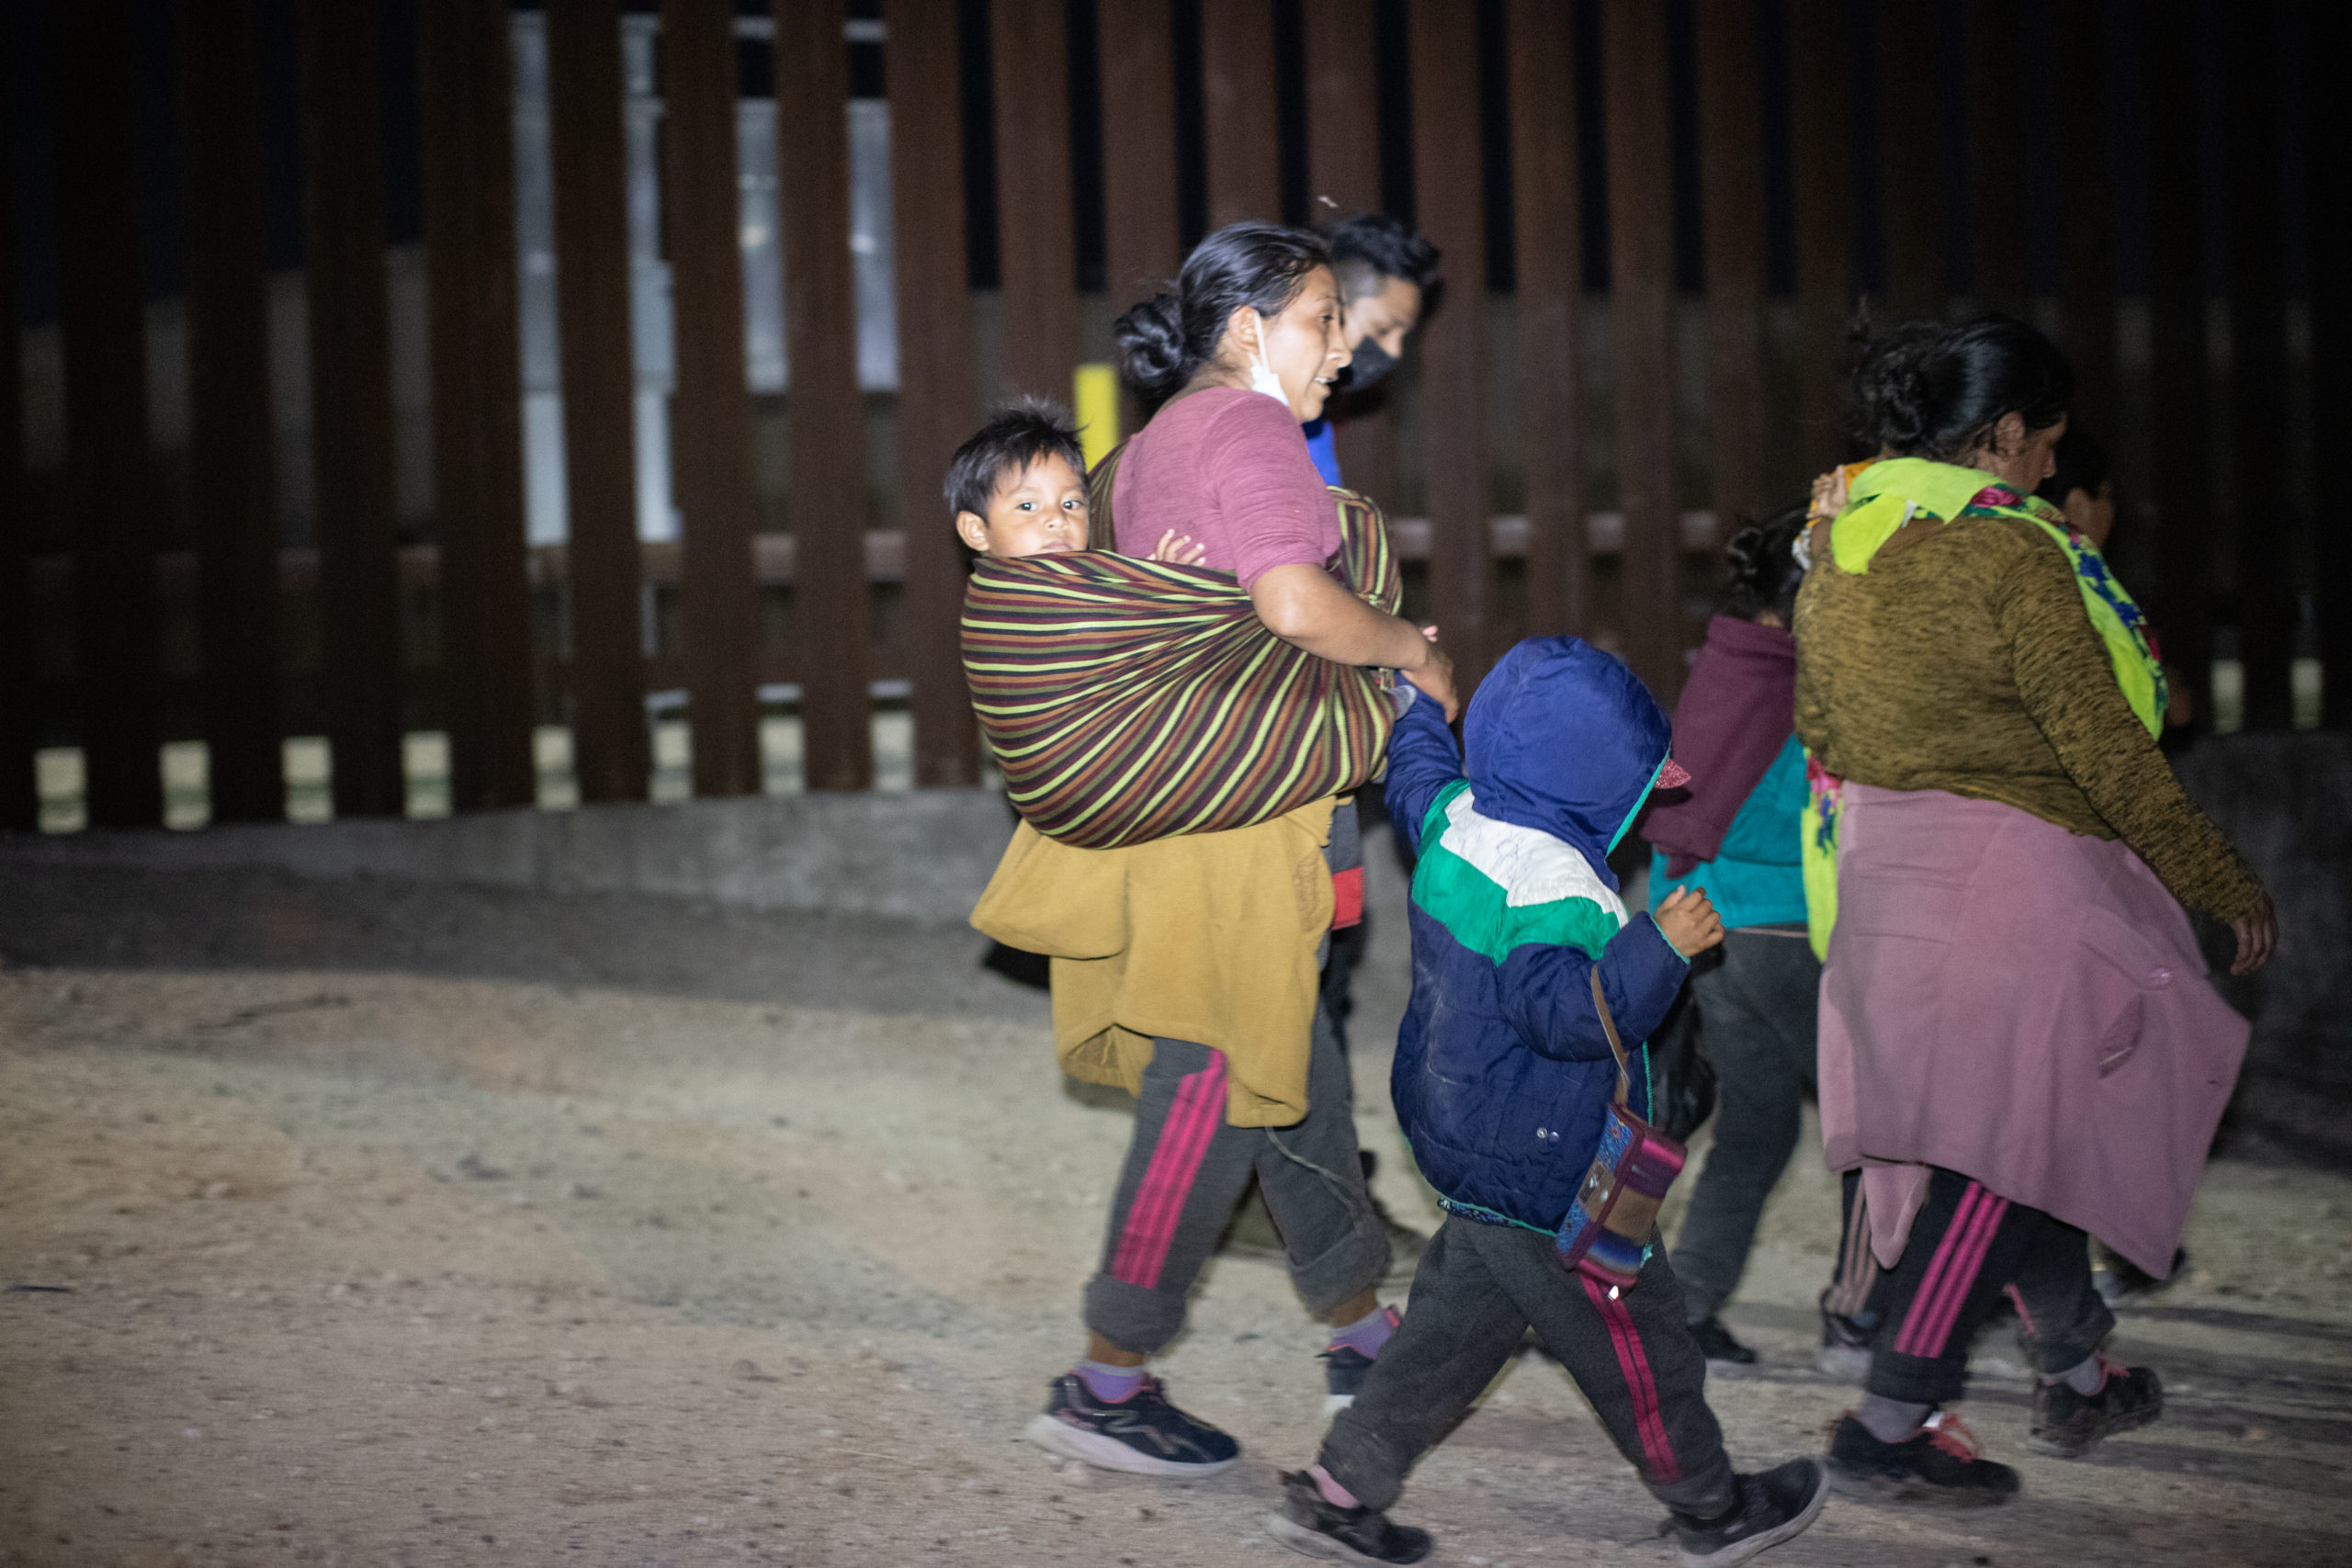 A group of migrants sought out law enforcement officials so they could turn themselves in and try to apply for asylum near the Hidalgo Point of Entry on August 9, 2021. (Kaylee Greenlee - Daily Caller News Foundation)